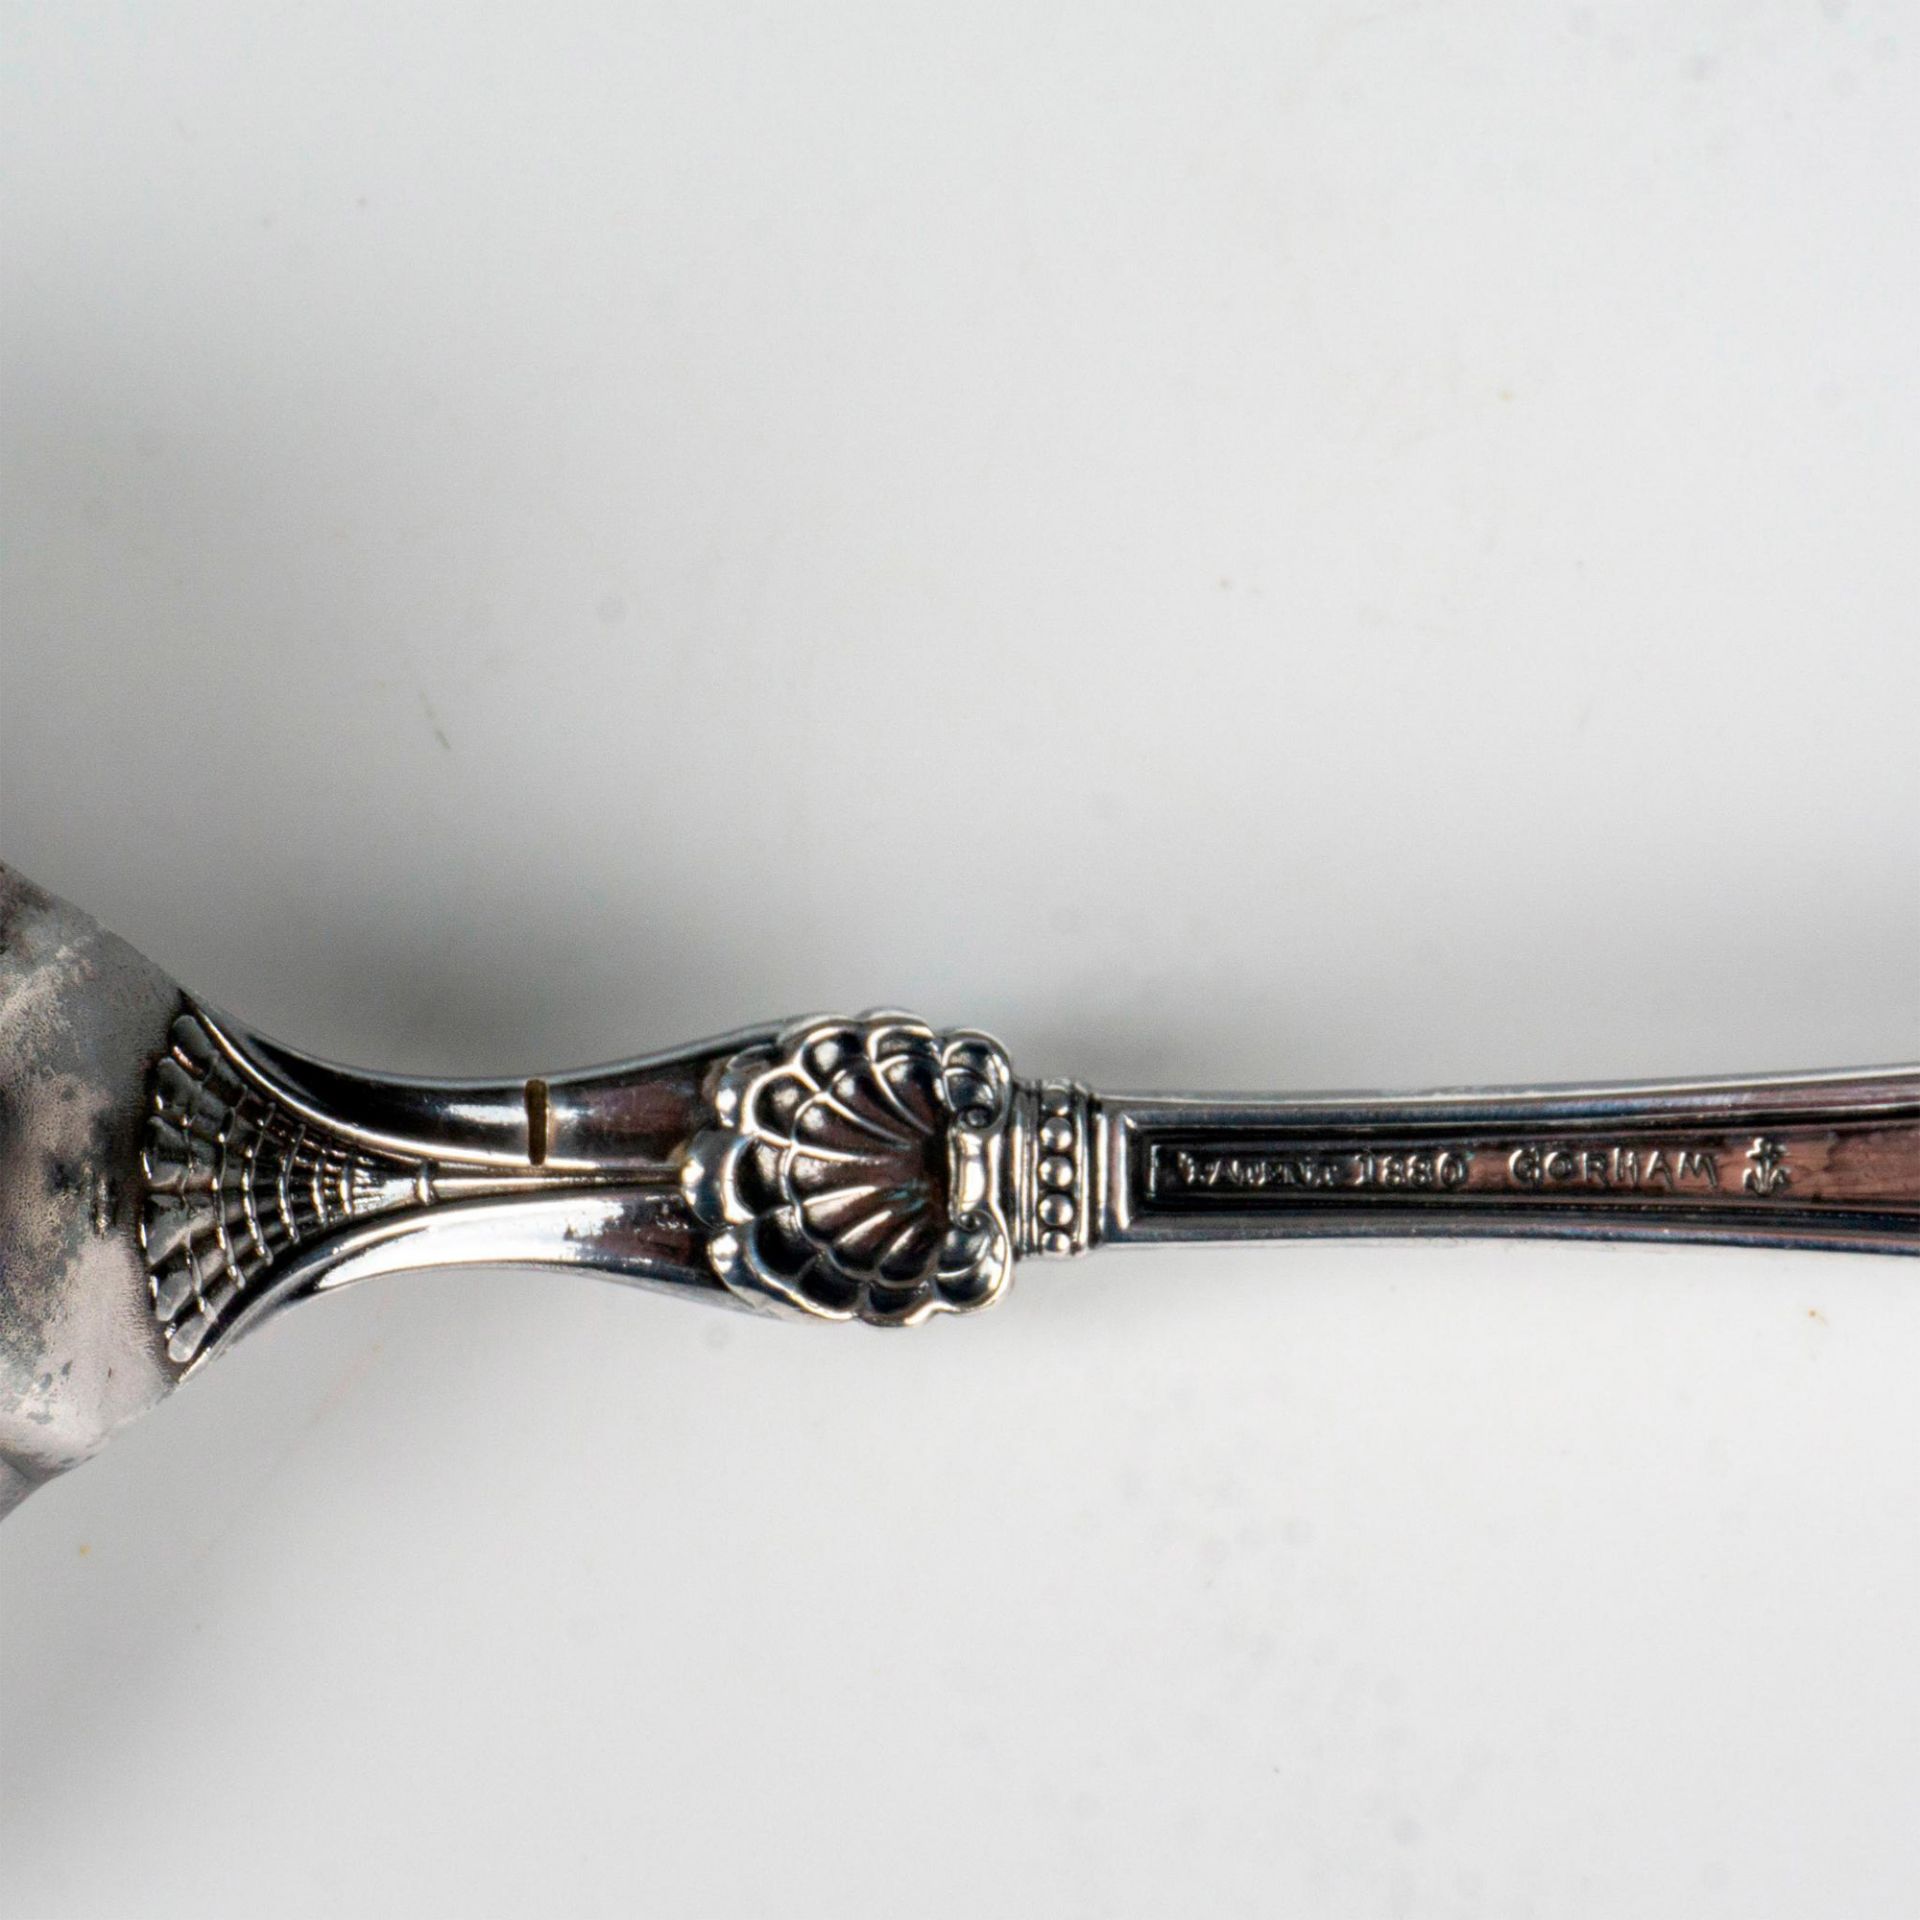 Gorham Silver Plated Large Crumb Knife, Princess Louise - Image 3 of 3